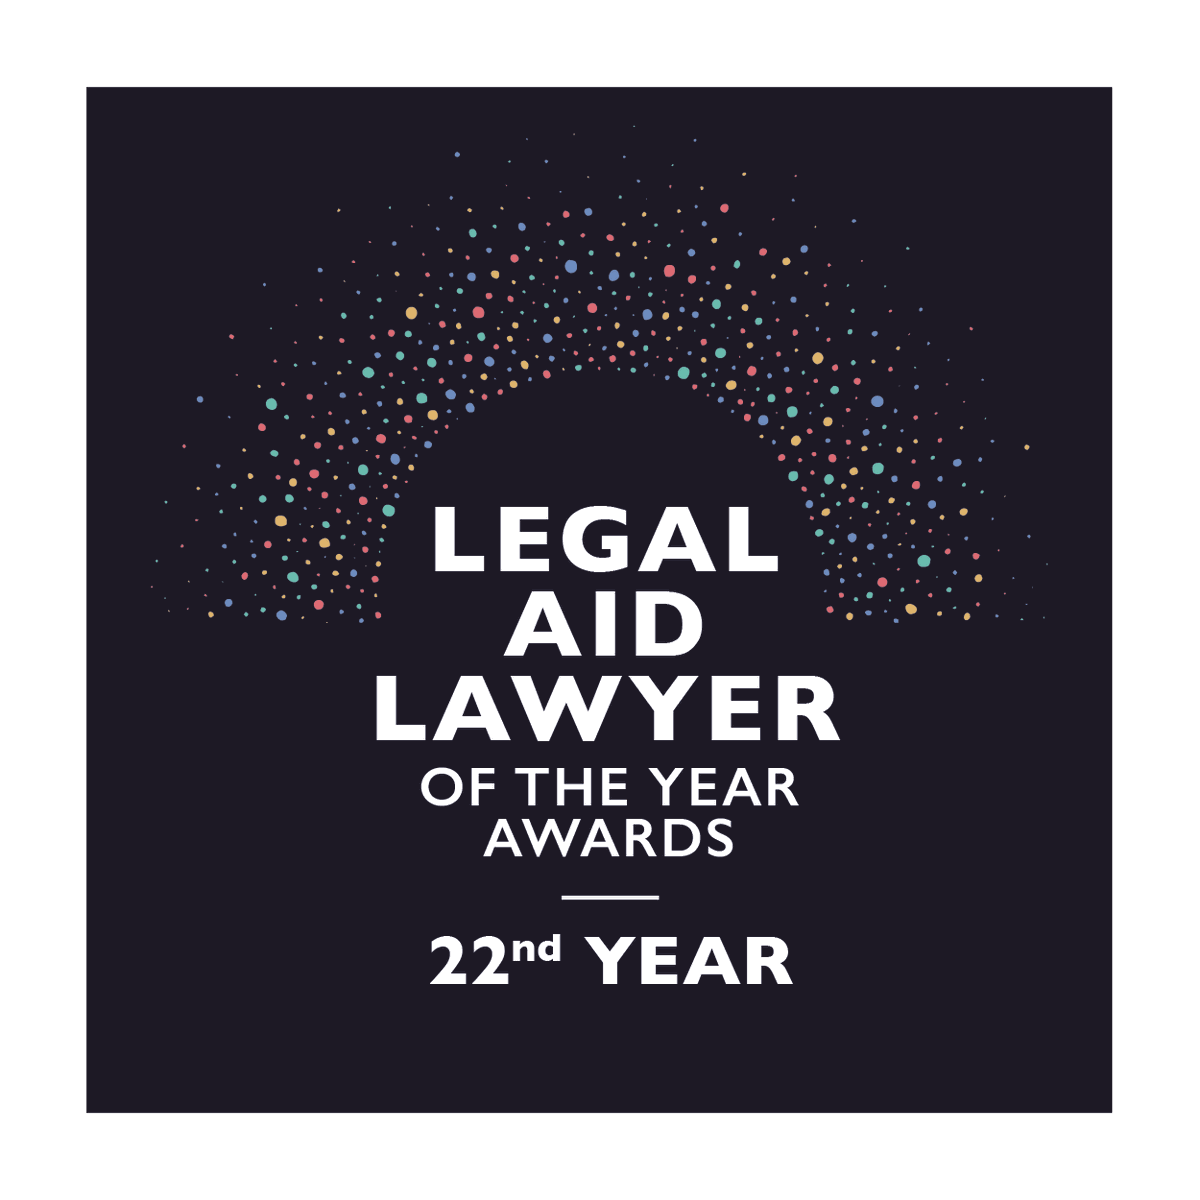 We are delighted to be sponsoring the Disability Rights category at this year's @LALYawards. We cannot wait to see the submissions, nominations are open now and close on April 22. Find out how to nominate: lapg.co.uk/lalys/laly-nom… #LALY24